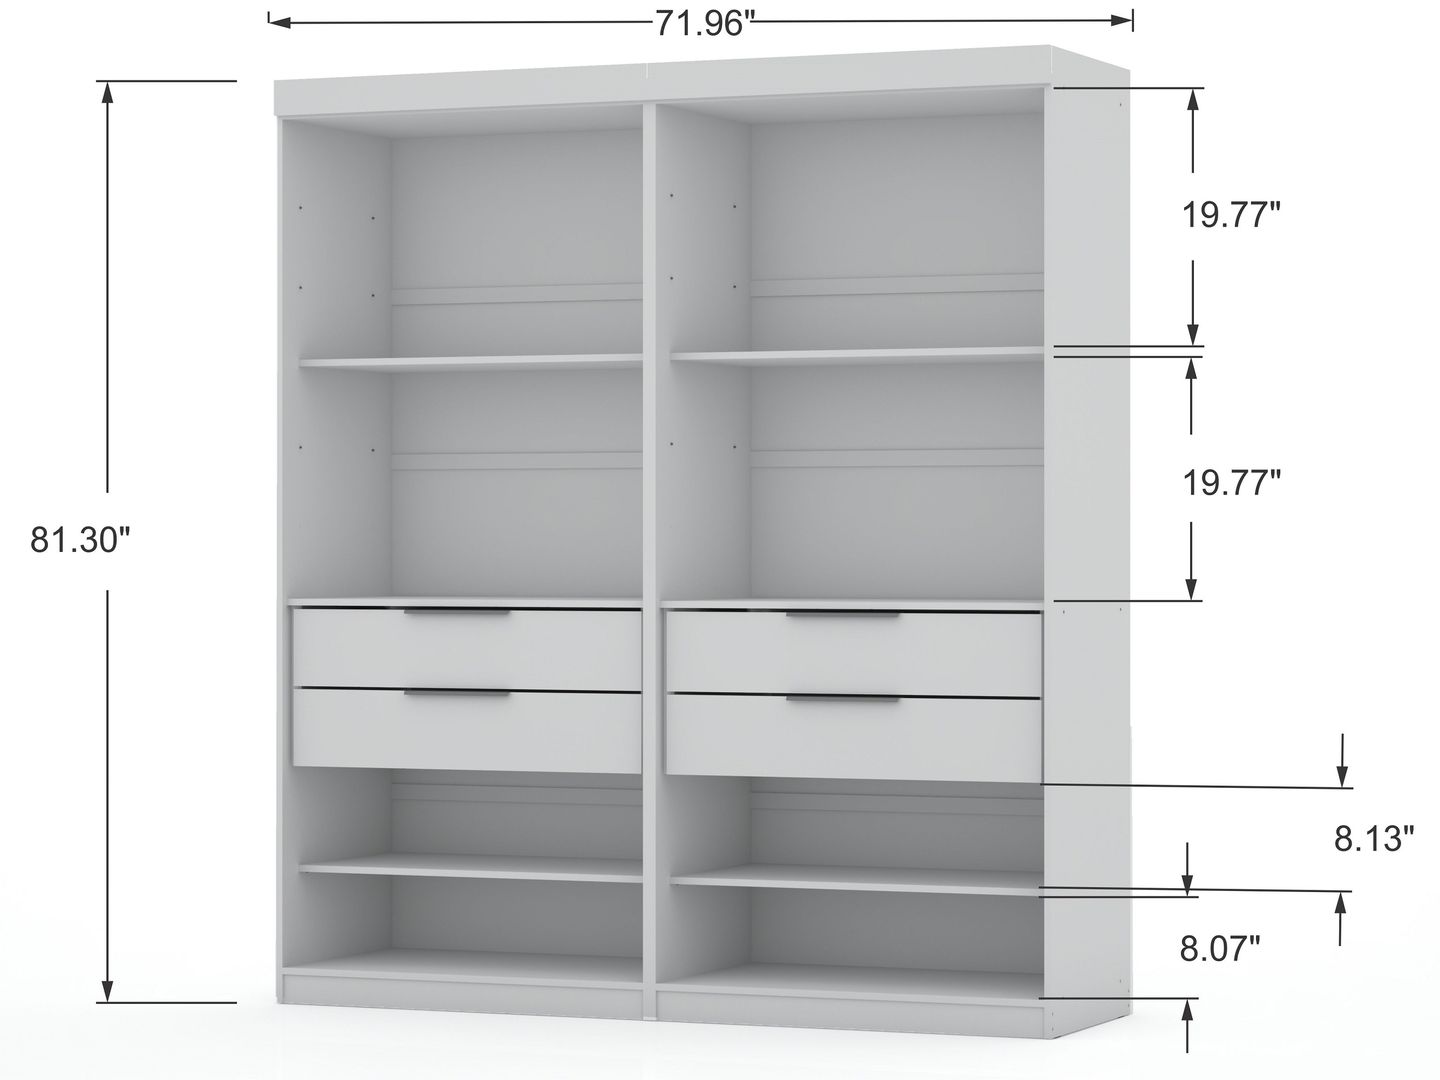 Manhattan Comfort Mulberry Open 2 Sectional Modern Wardrobe Closet with 4 Drawers - Set of 2 in White